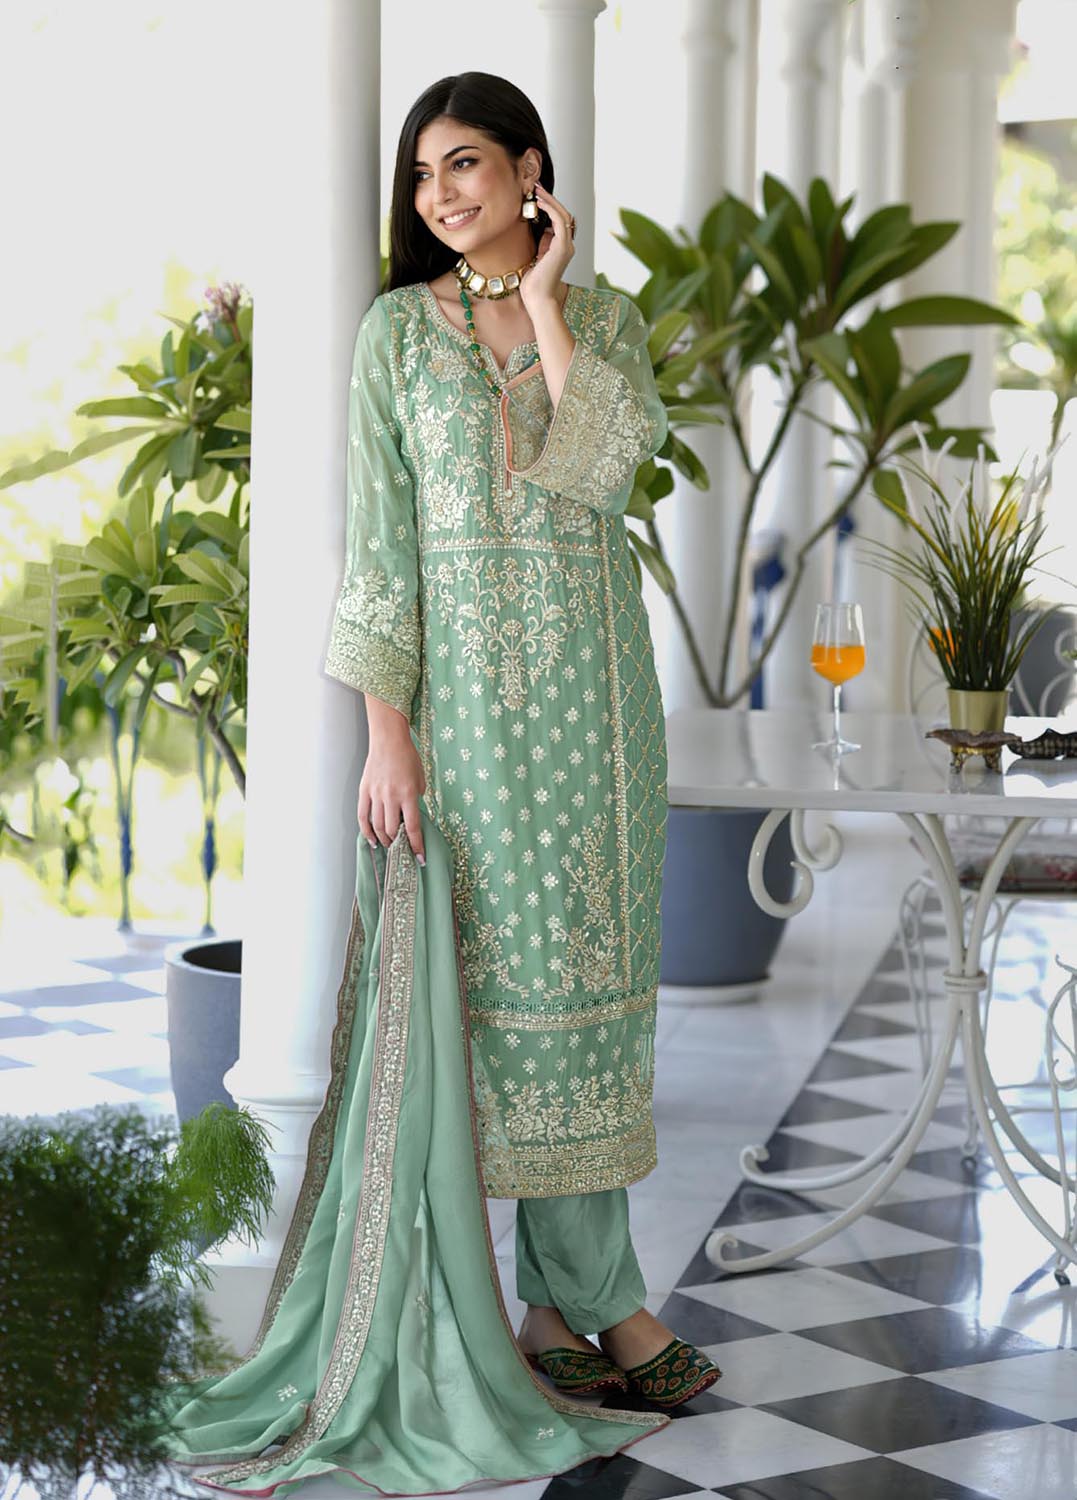 Party Wear Yellow Chinon Semi Stitched Embroidered Suit Set For